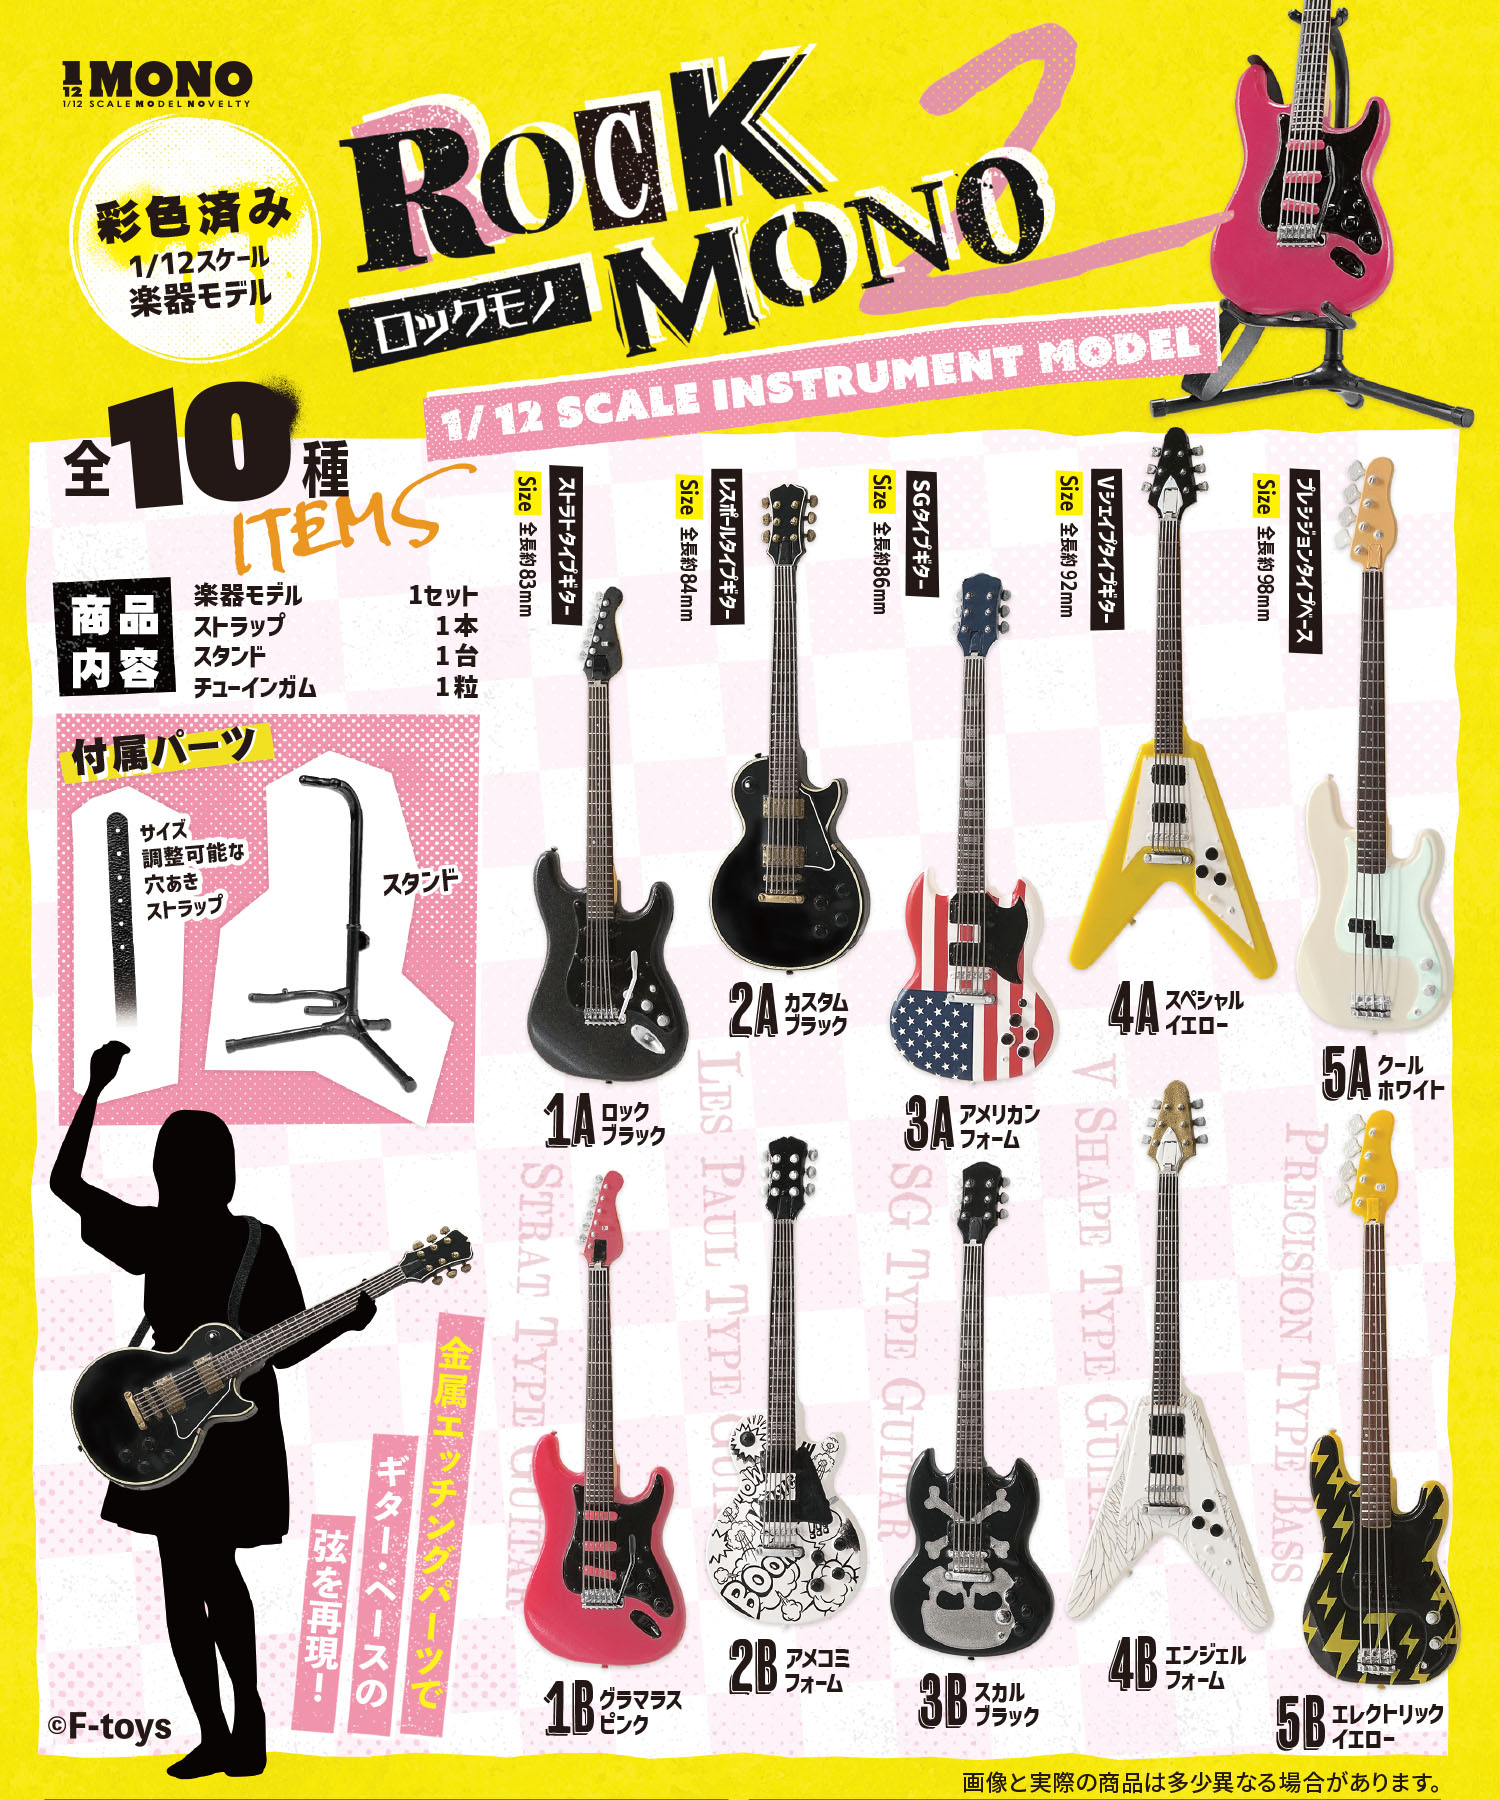 ROCK MONO2 - 株式会社 エフトイズ・コンフェクト